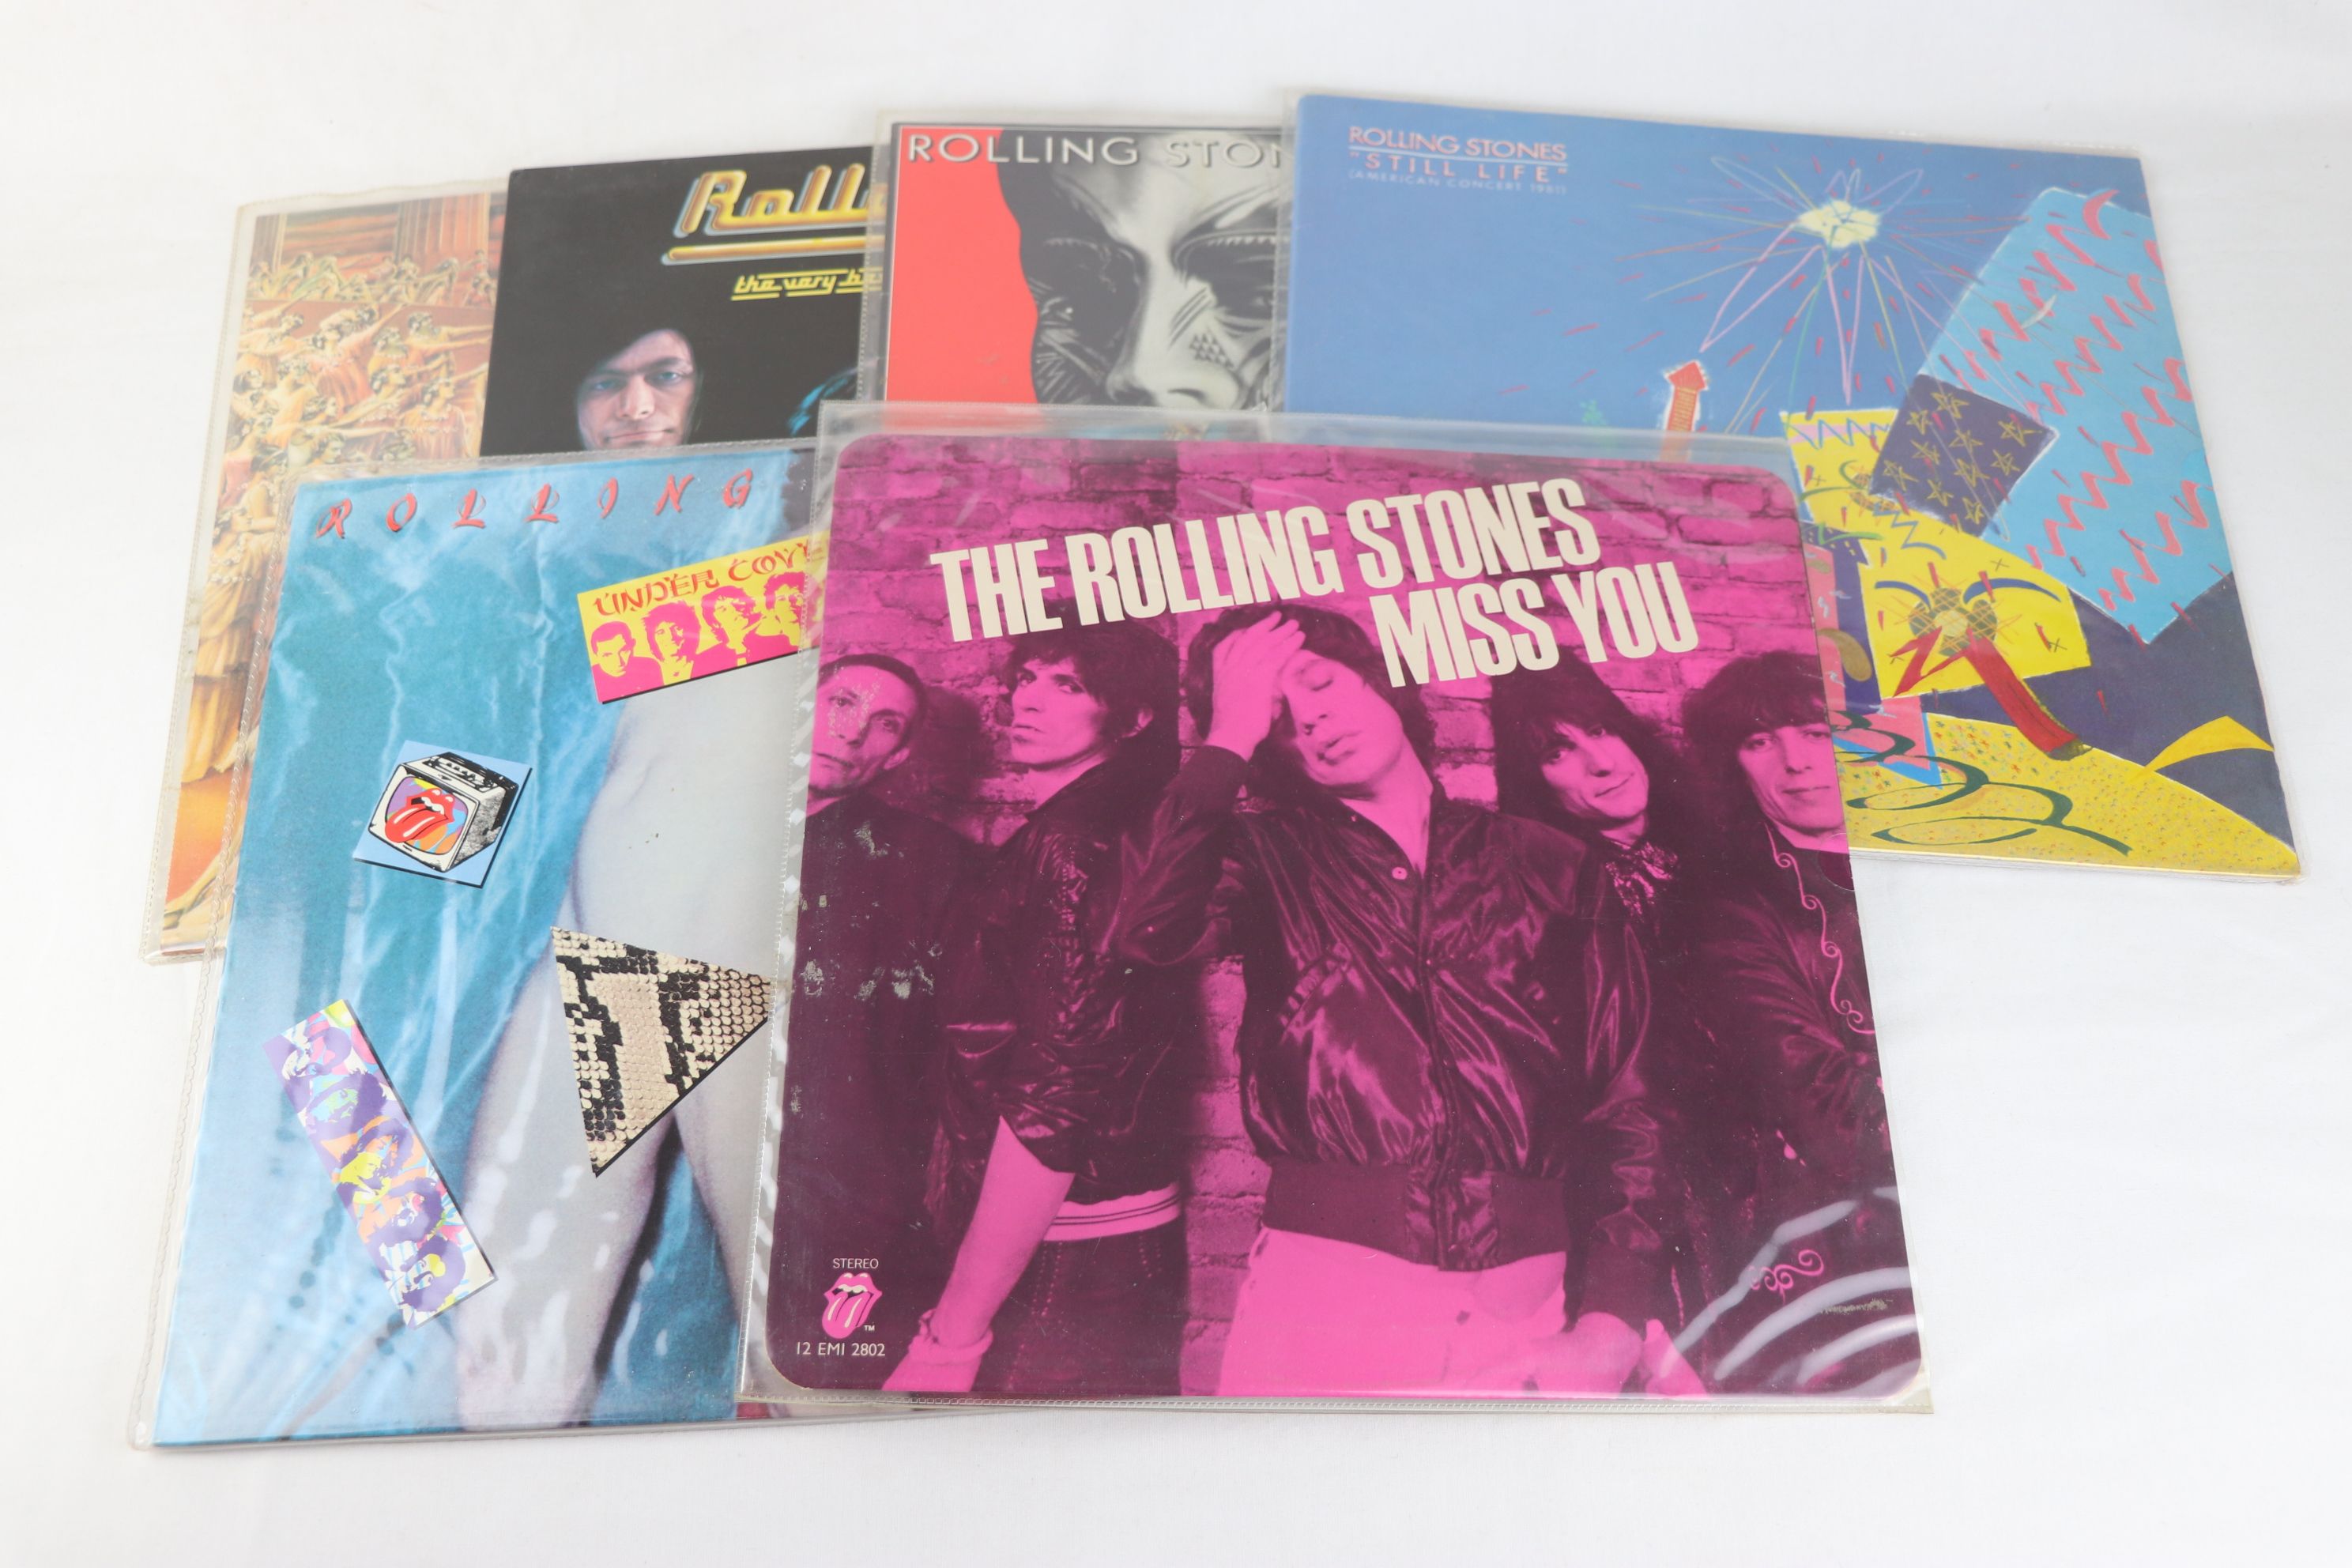 Vinyl - Five The Rolling Stones LPs plus a pink coloured Miss You 12", LPs include Rolled Gold,